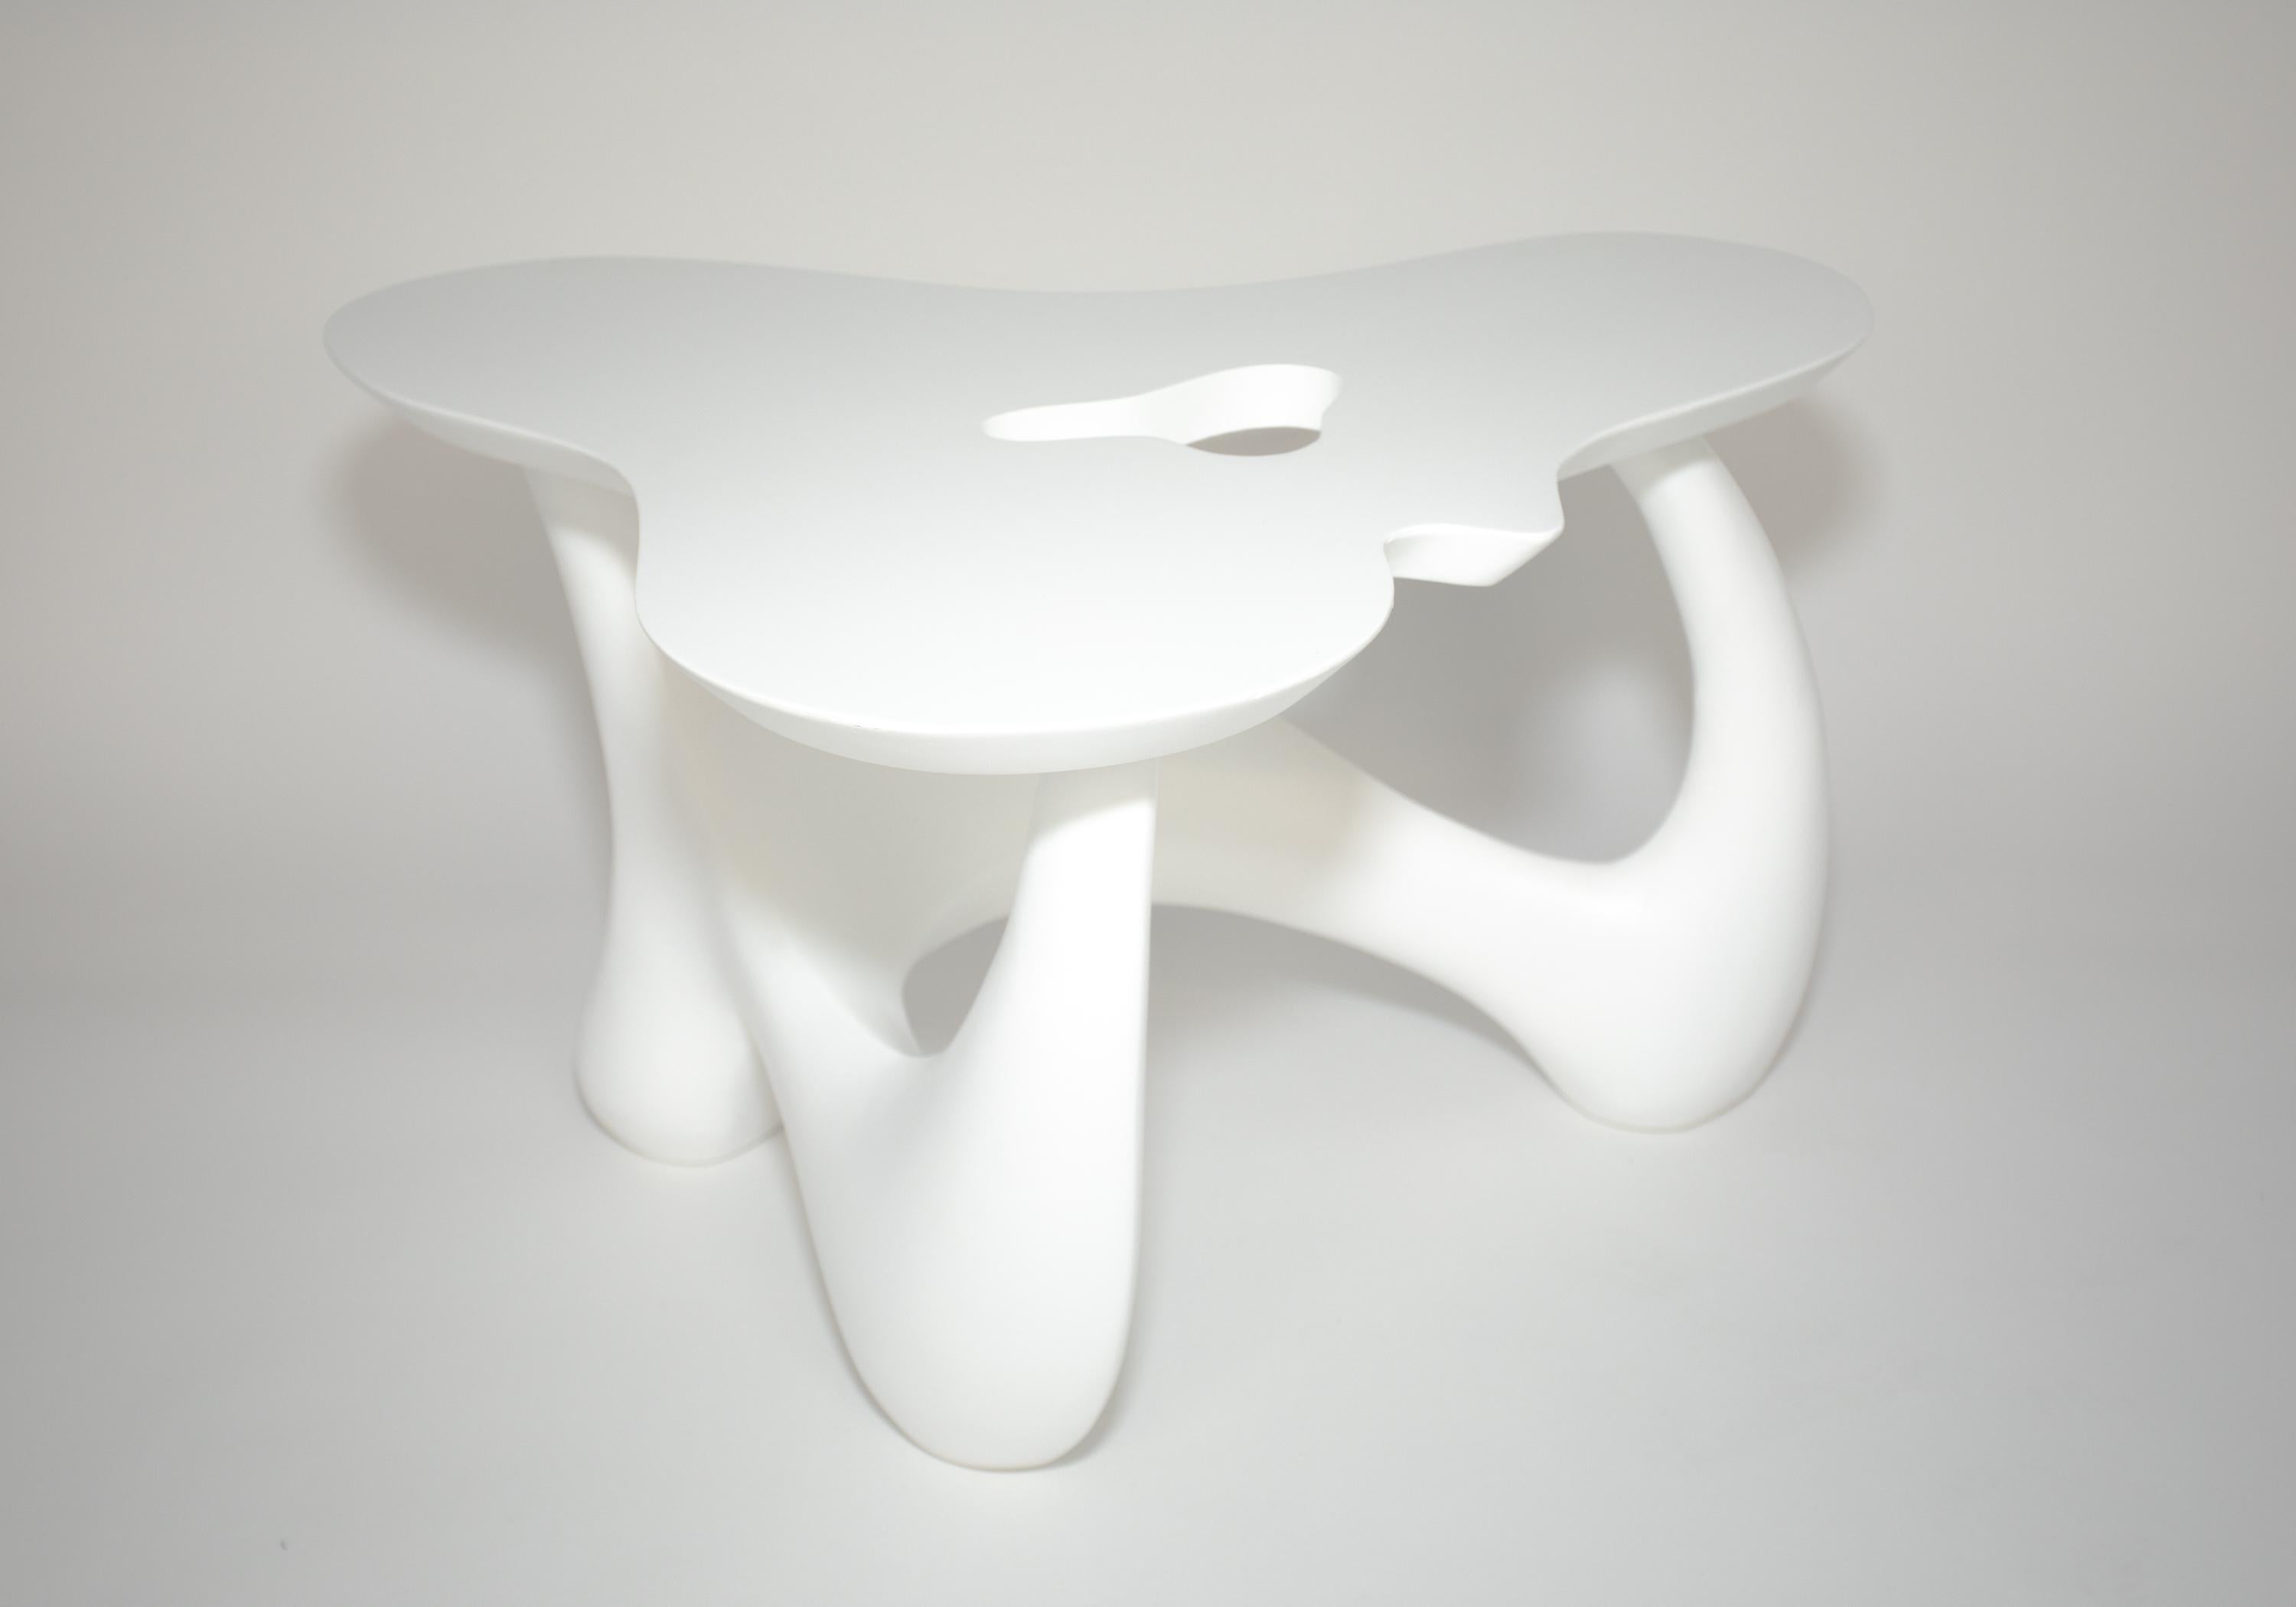 White Lacquered Wood Biomorphic Table
An exuberant example of Mid Century Design
The base and the top are separate Pieces
nicely refinished


